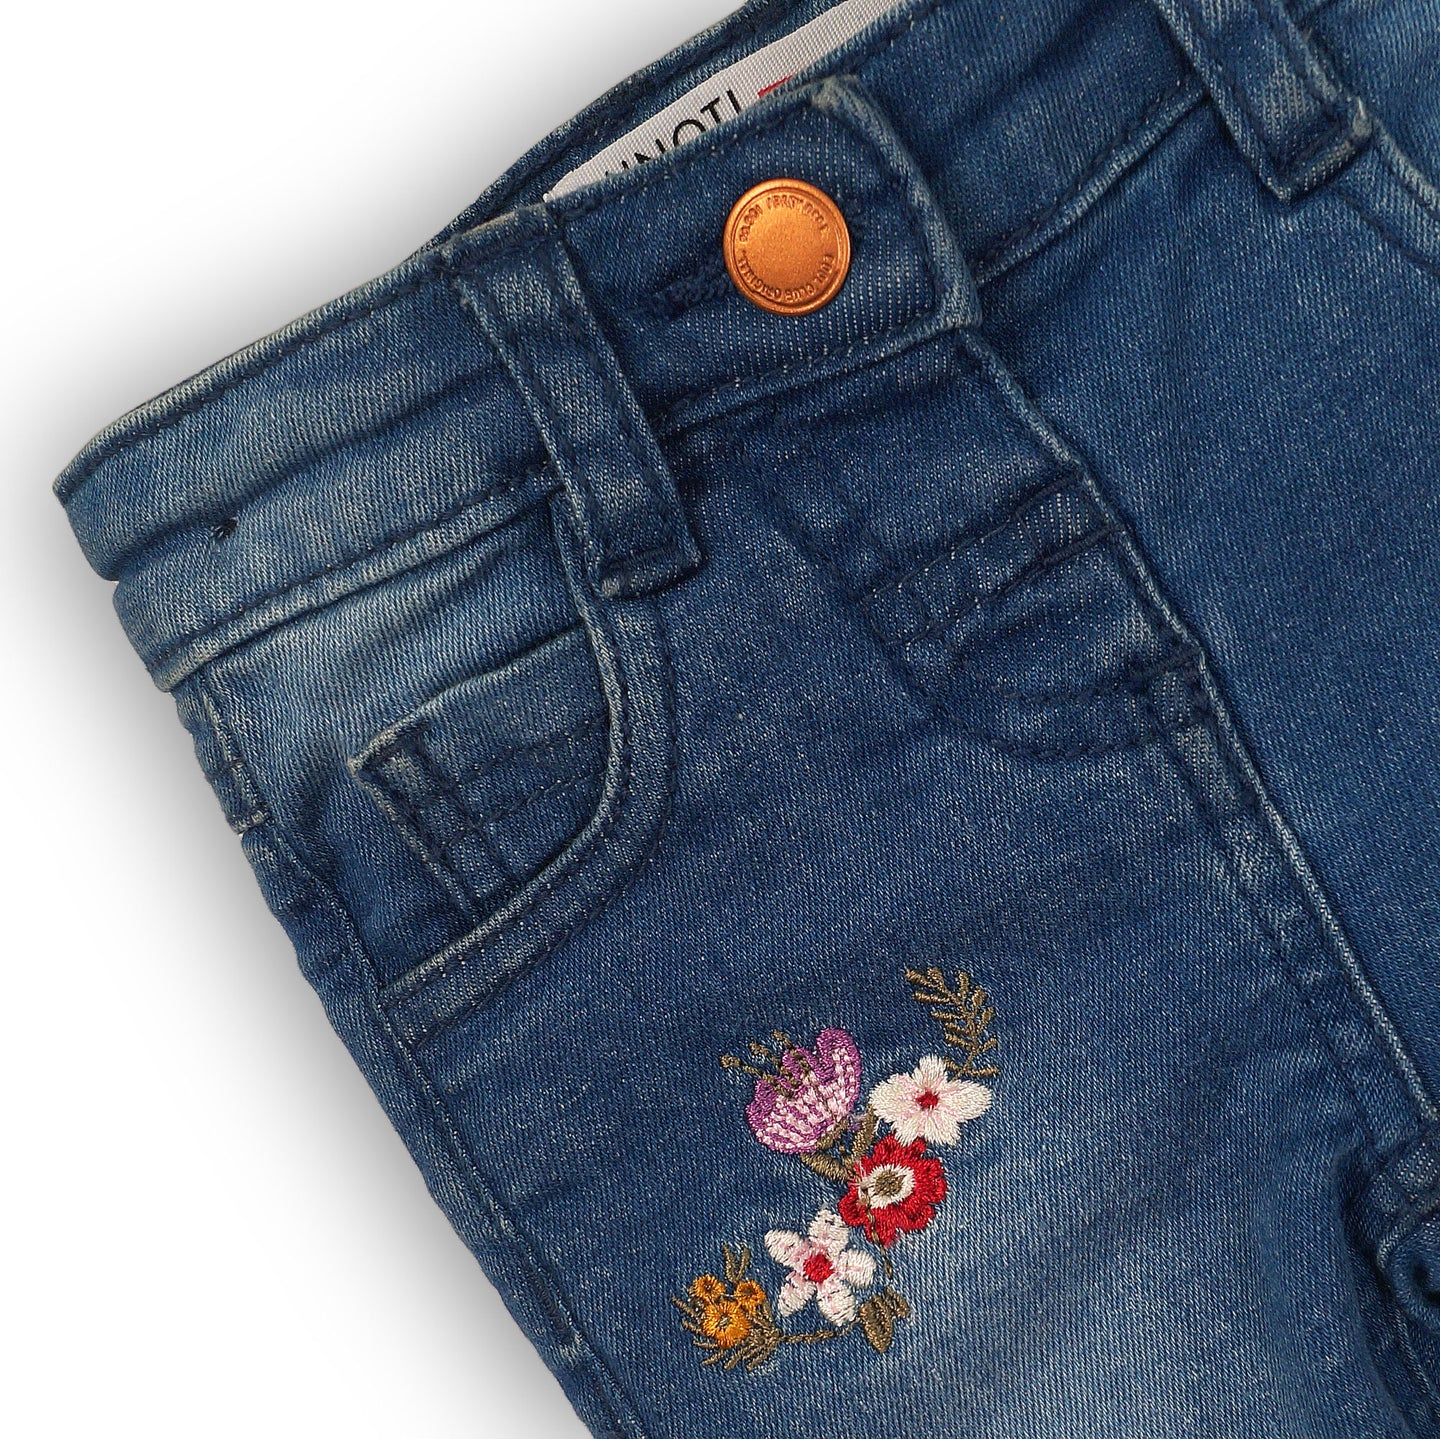 Jeans with flowers